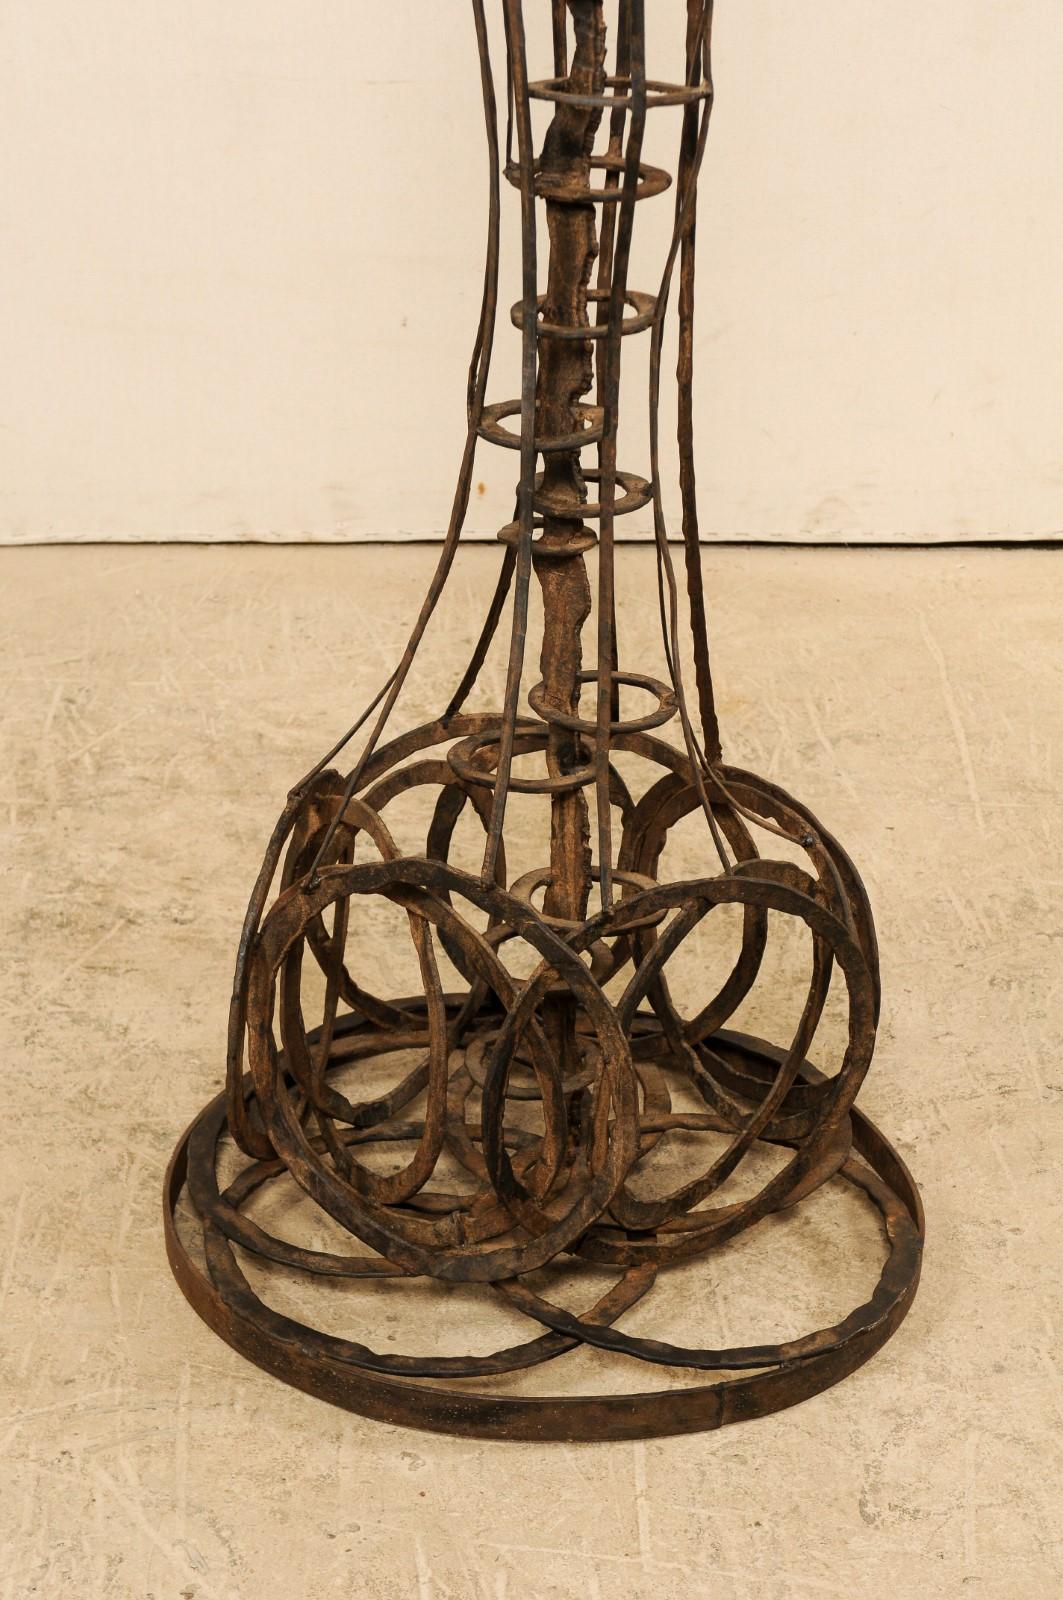 Tall French Sculptural Iron Abstract Art Piece, circa 1930s-1940s For Sale 3